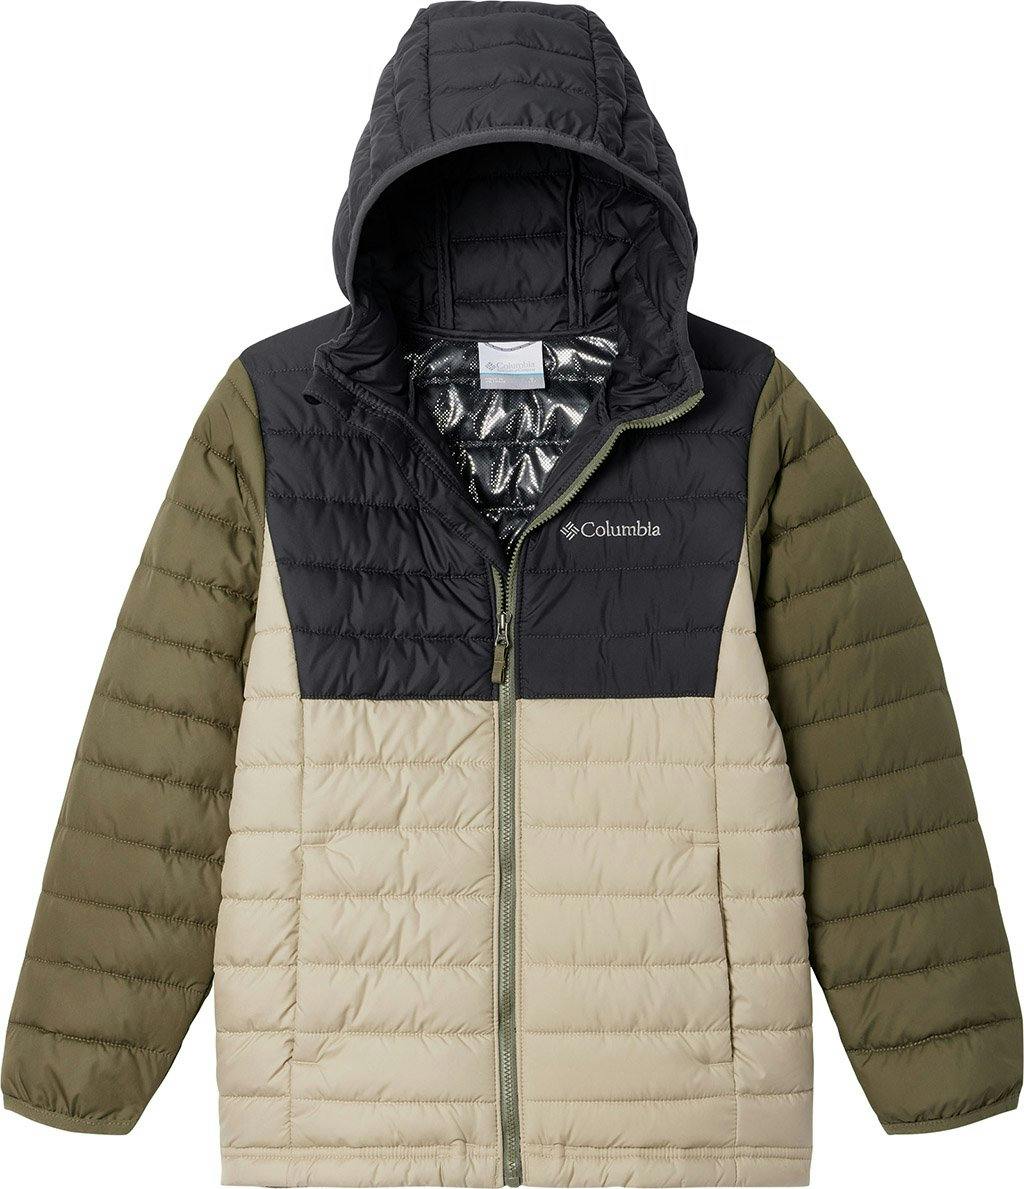 Product image for Powder Lite Hooded Jacket - Boys